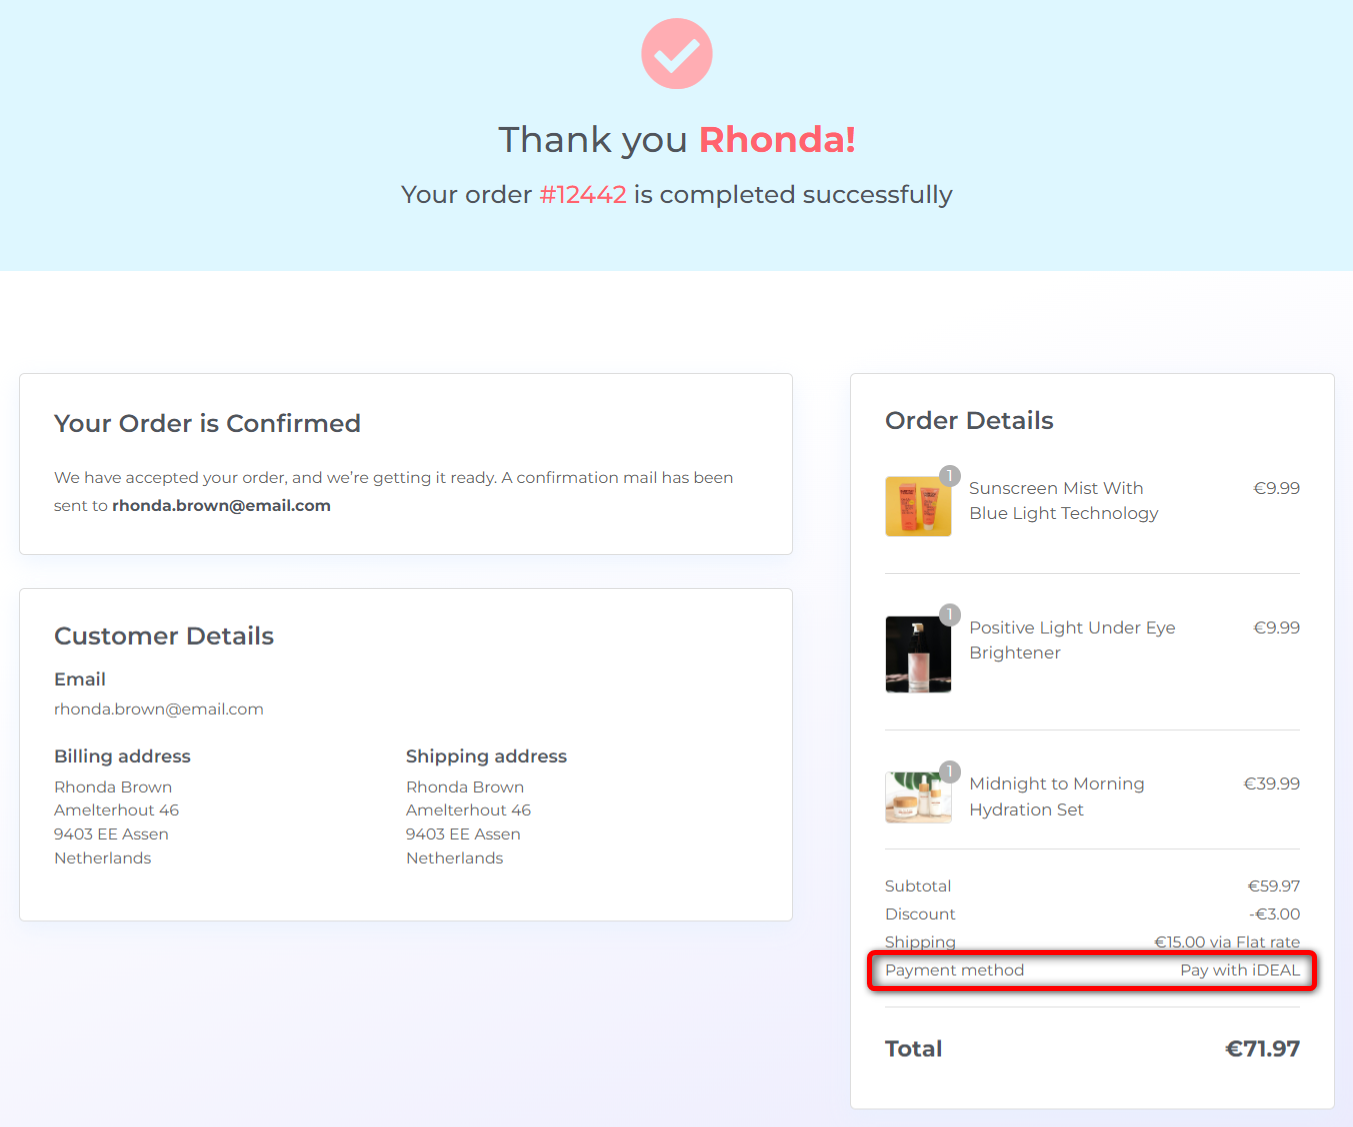 Verify the order confirmation page shows all the details and correct payment method